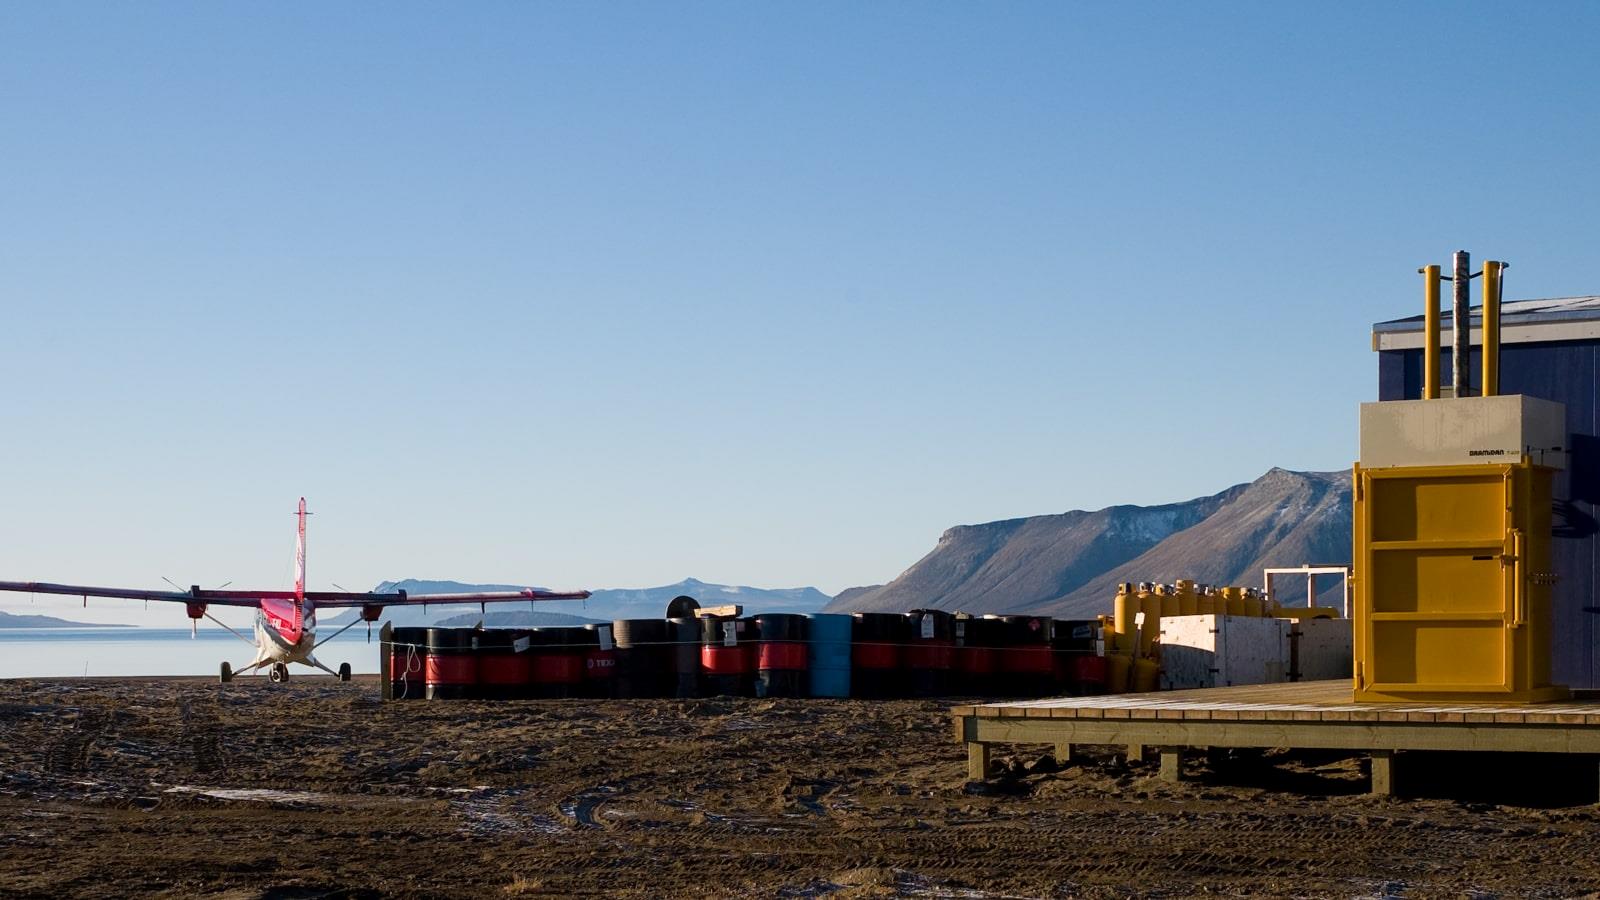 Plane and Bramidan drum press outside Zackenberg research station in Greenland